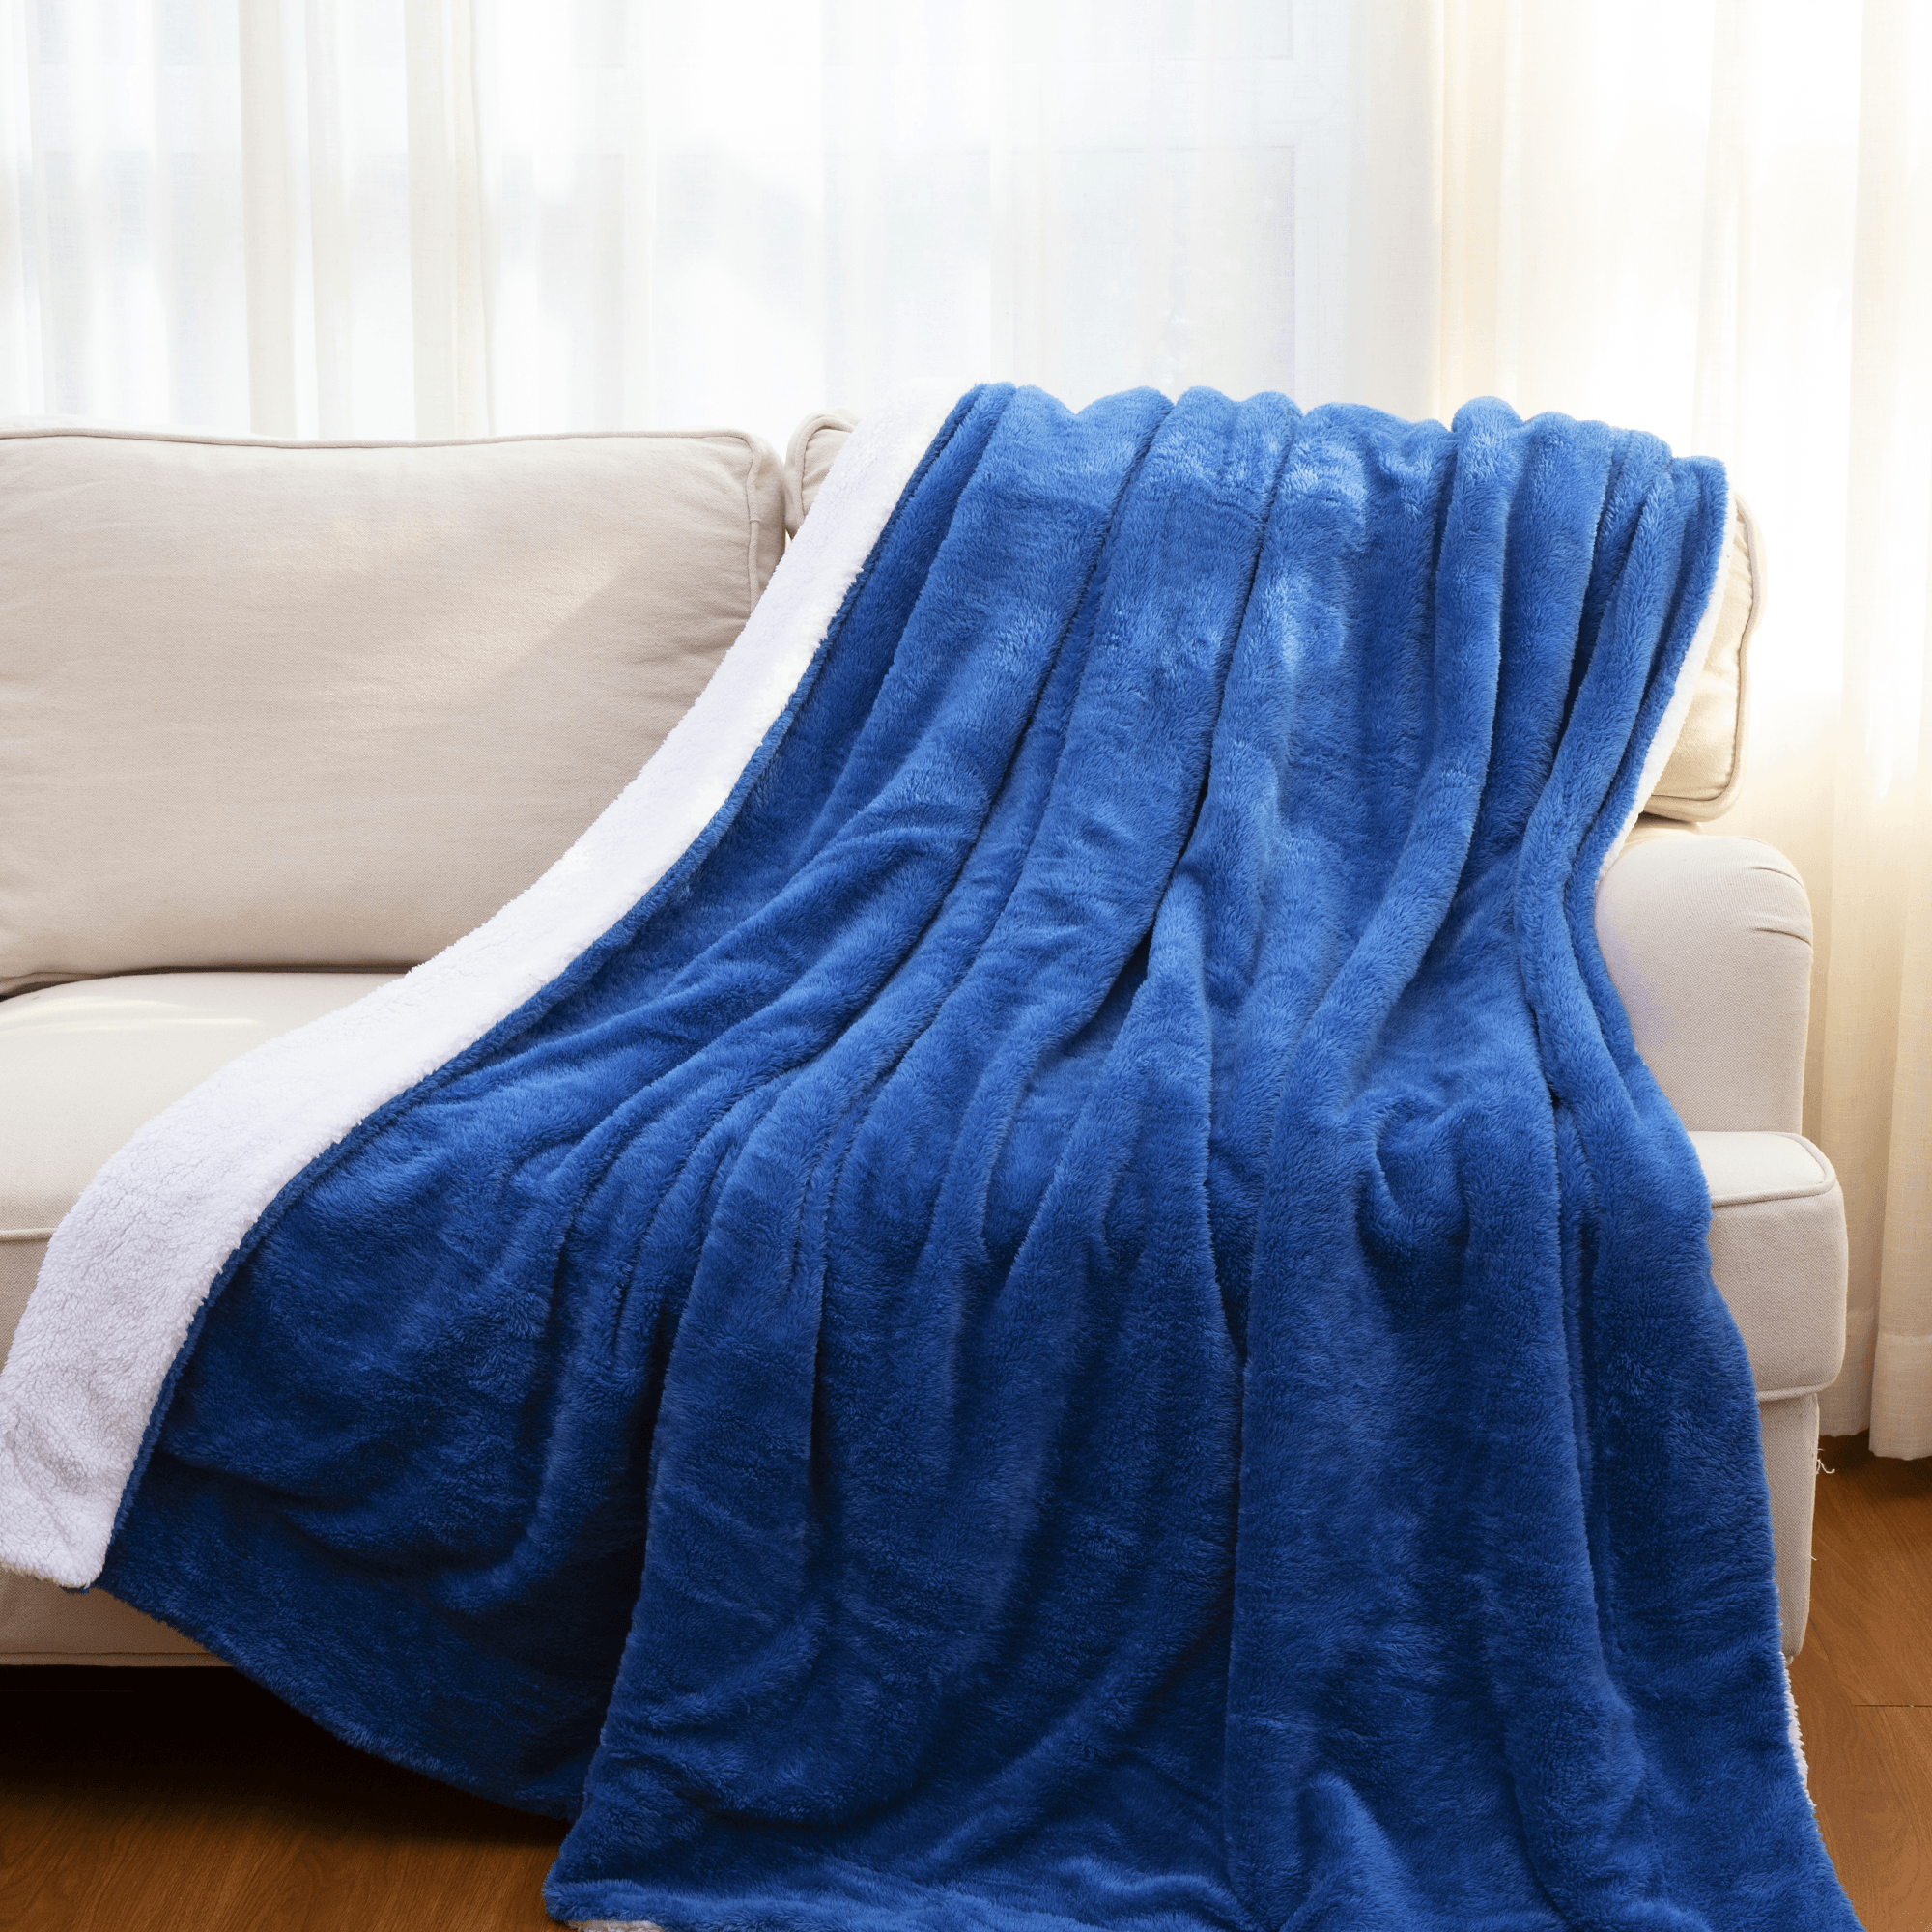 https://cdn.shopify.com/s/files/1/2091/6511/products/cheer-collection-microsherpa-throw-blanket-luxury-soft-velvet-elegant-decorated-stylish-accent-blanket-234438.png?v=1678133845